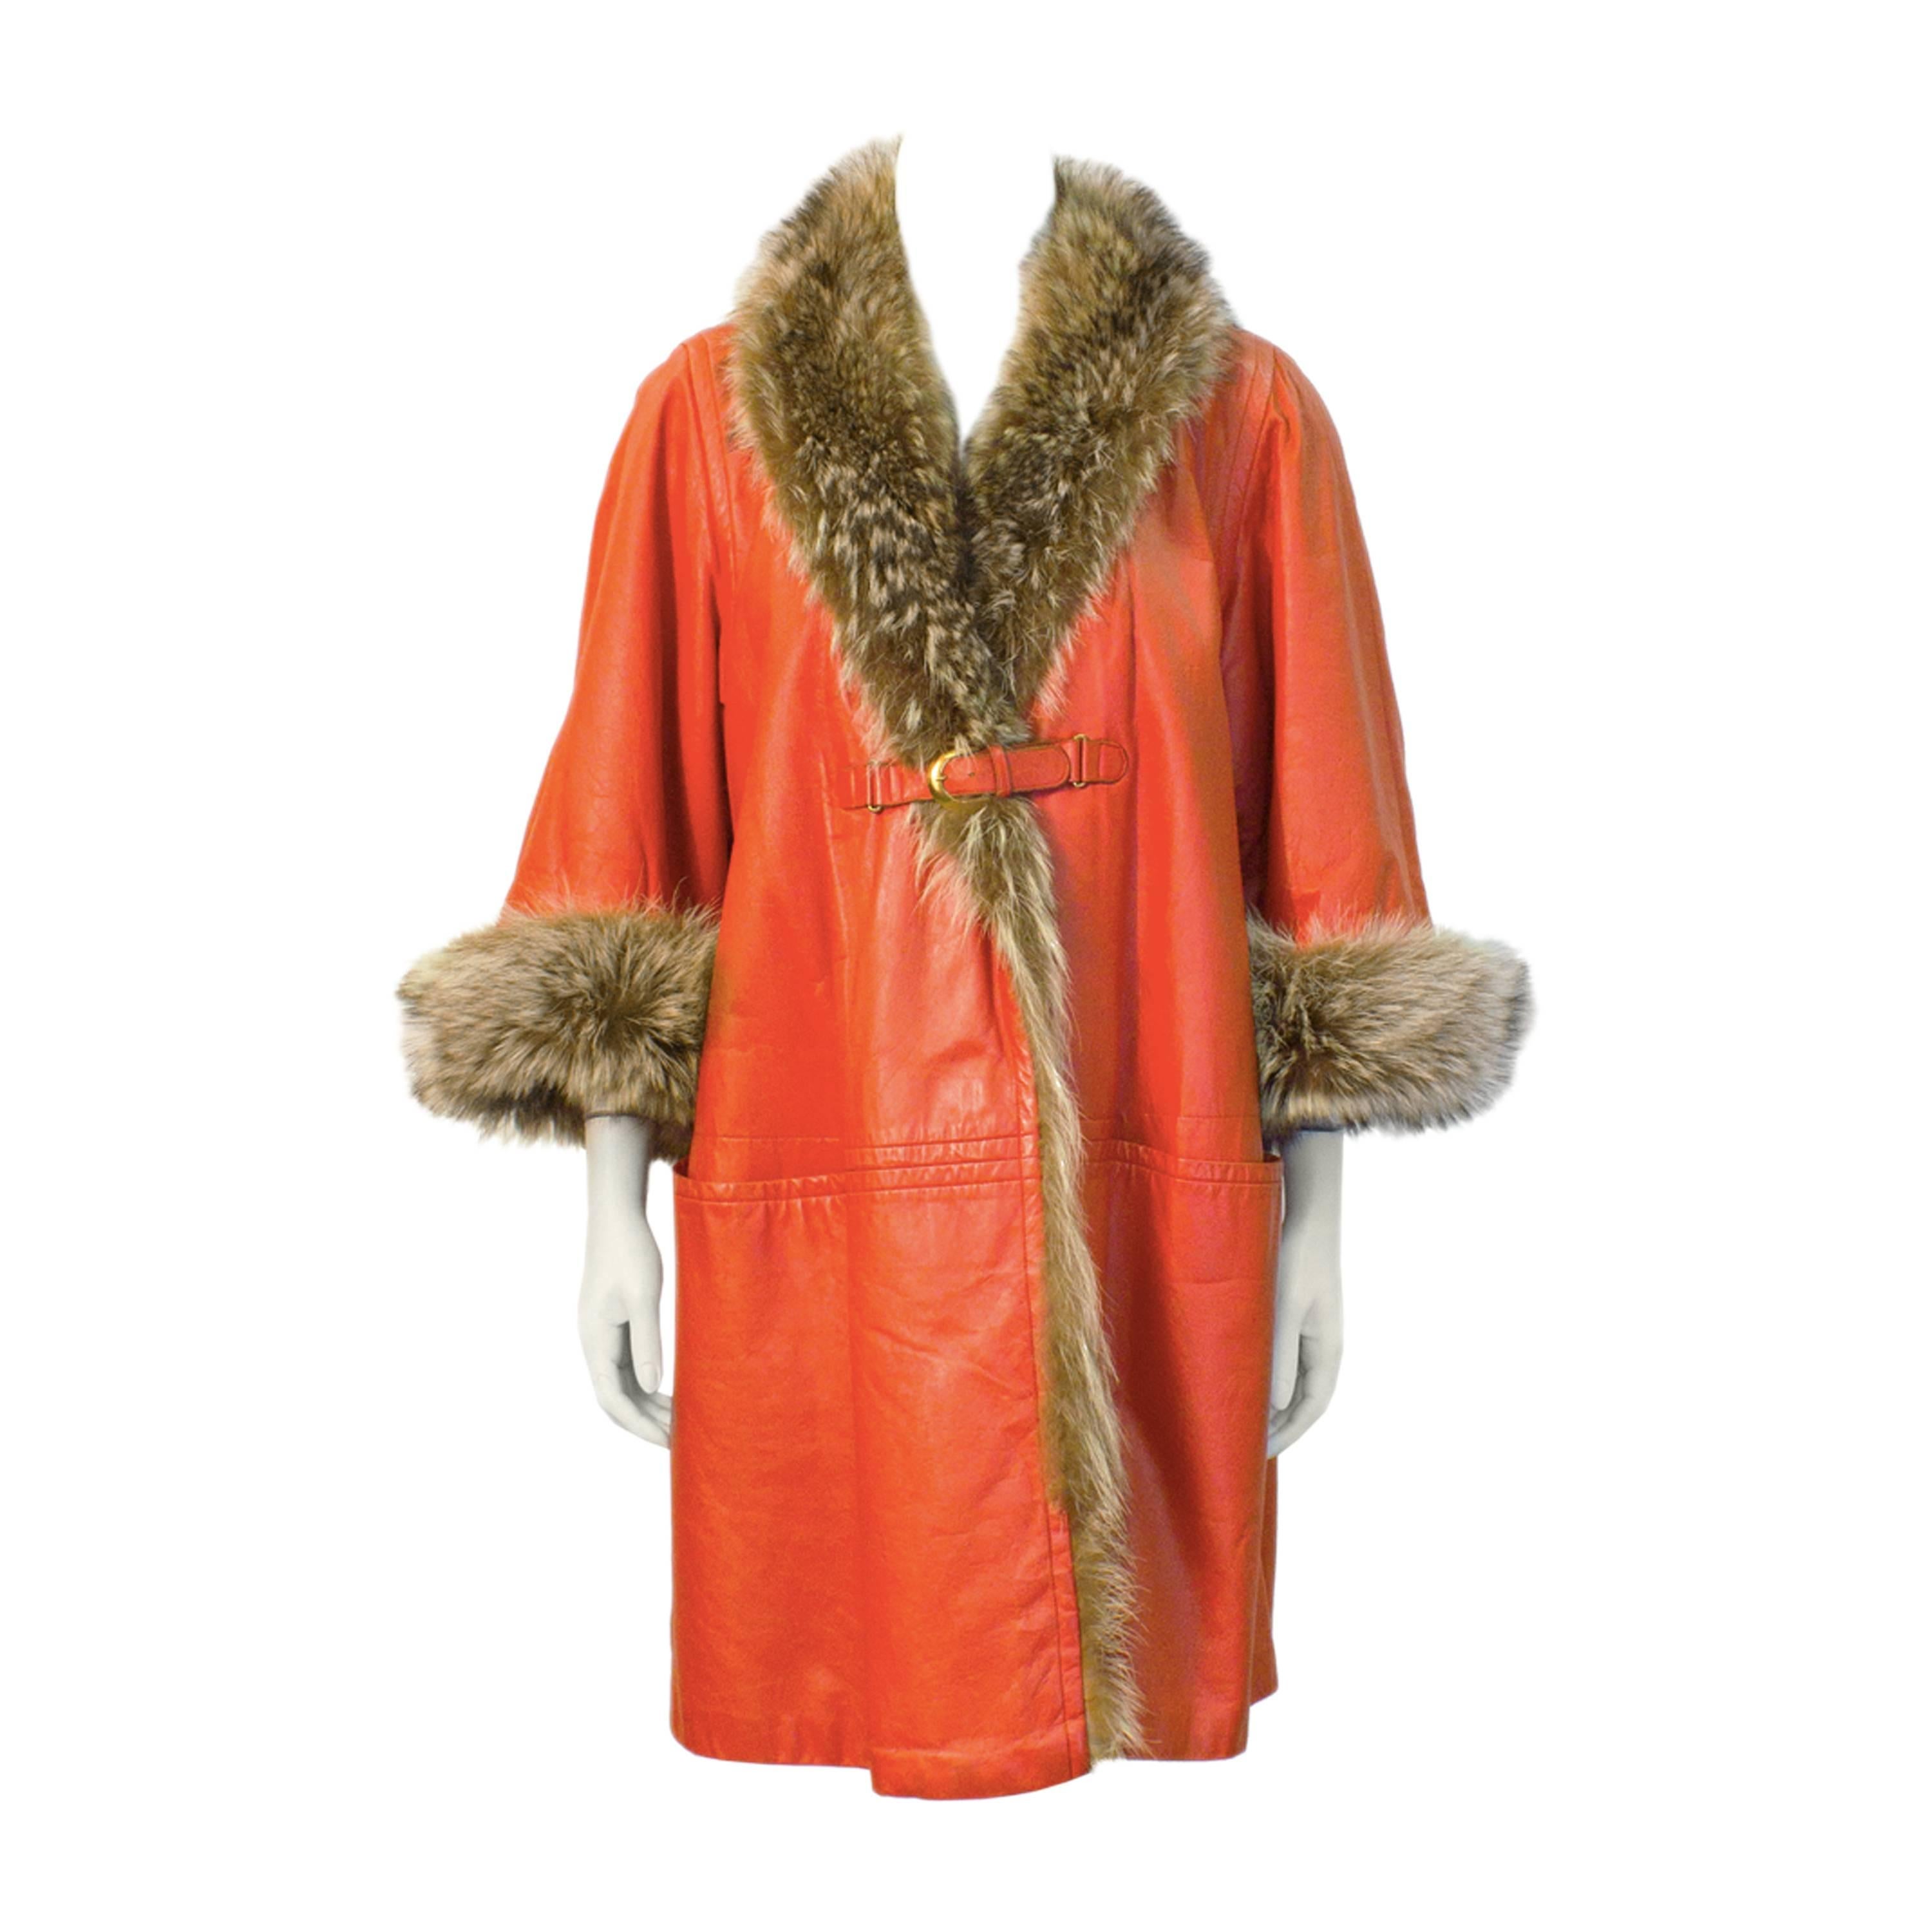 Vintage Coat With Fur Collar And Cuffs - 2 For Sale on 1stDibs